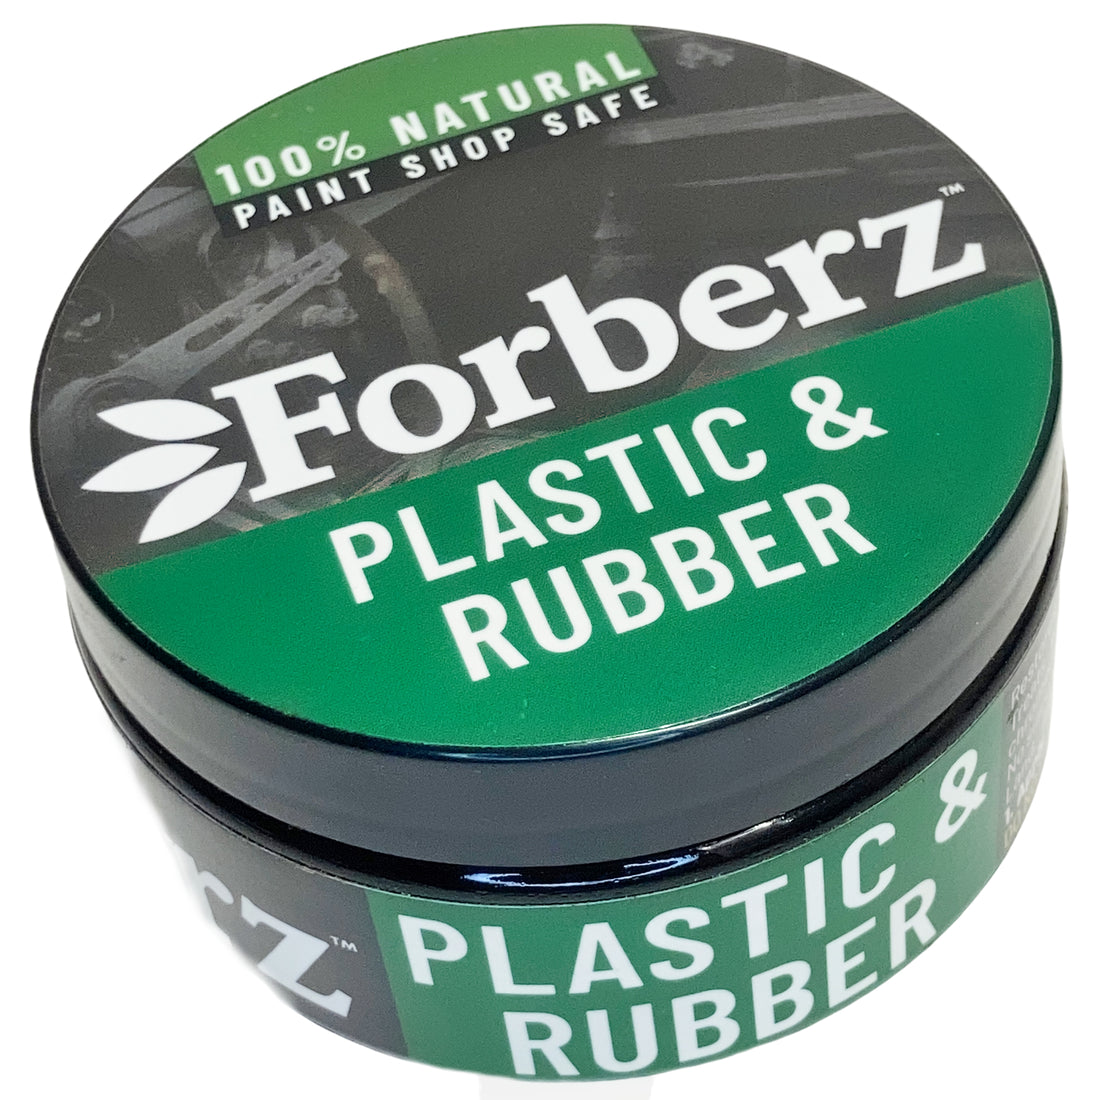 Revive and Restore: Forberz™ Plastic & Rubber - The Ultimate Solution for Plastic and Rubber Care